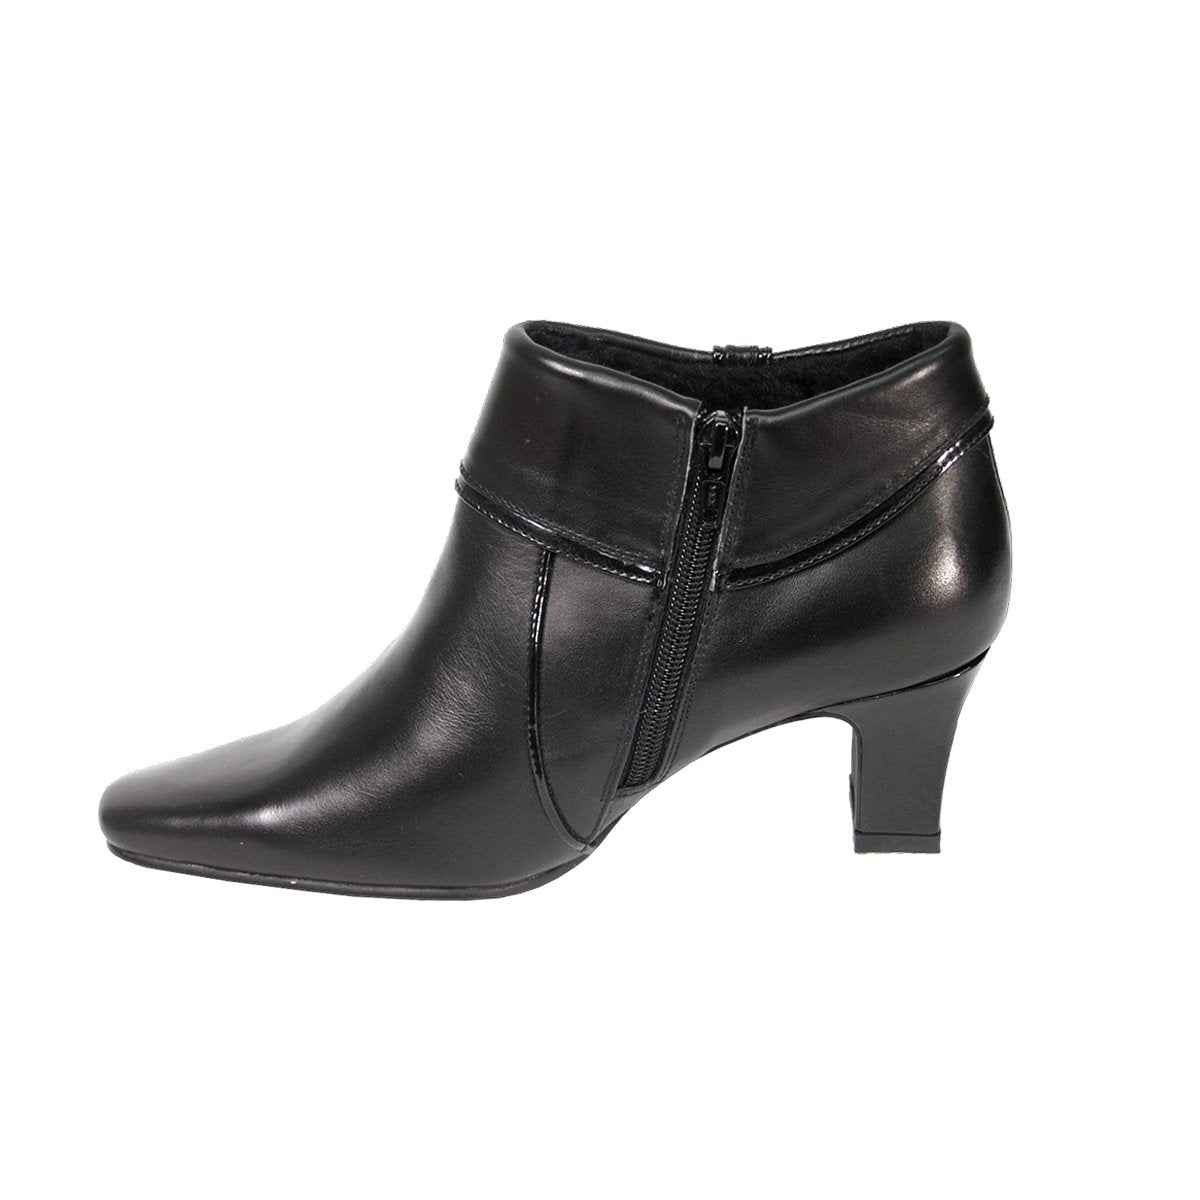 PEERAGE Blair Women's Wide Width Leather Ankle Boots